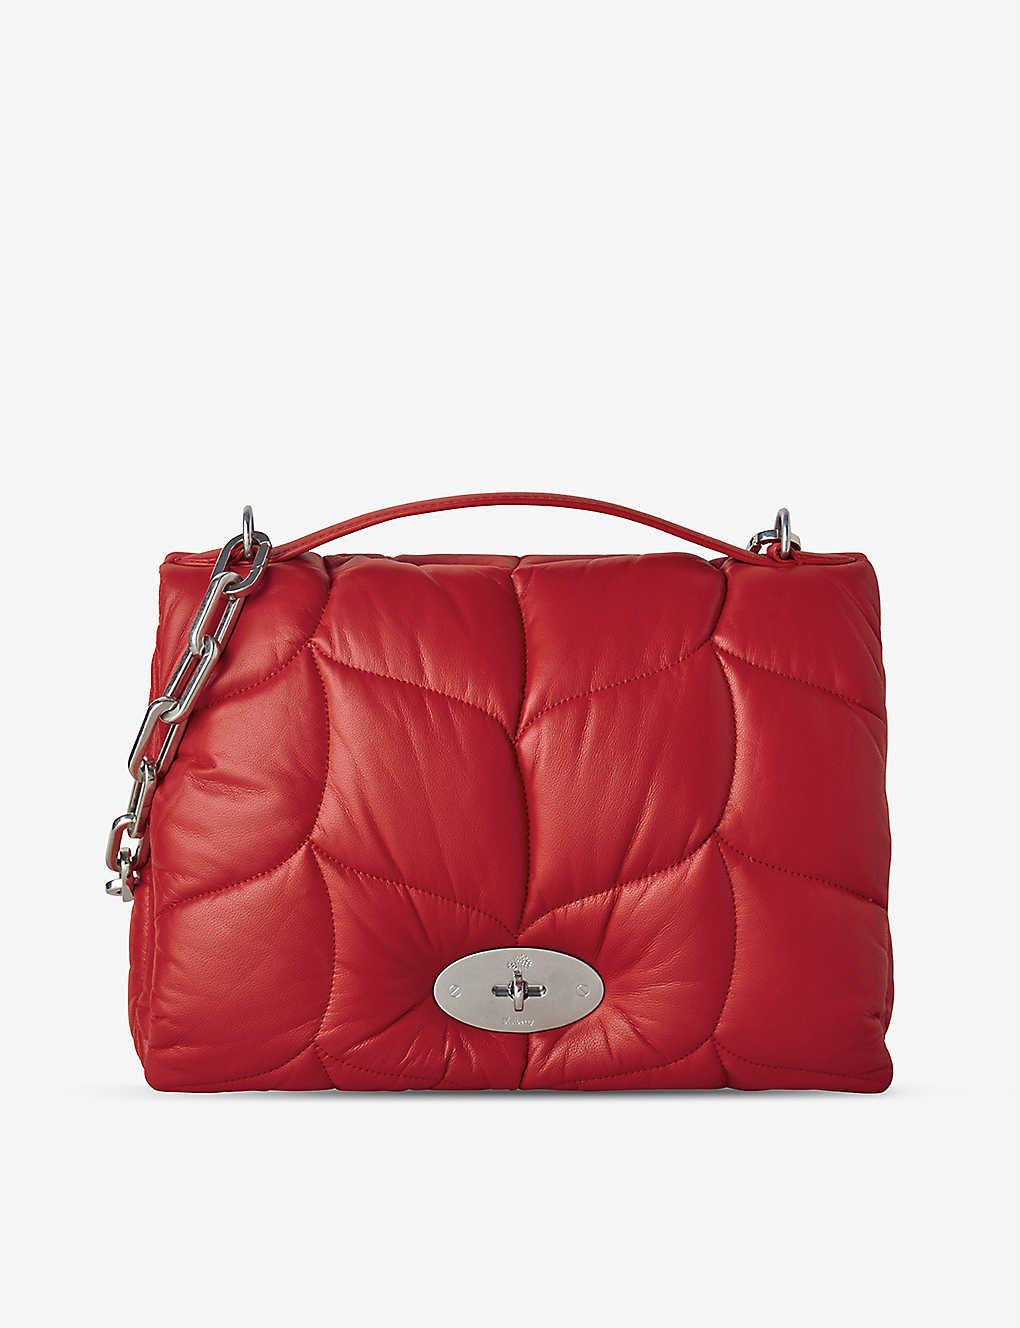 Mulberry Little Softie Leather Shoulder Bag in Red | Lyst